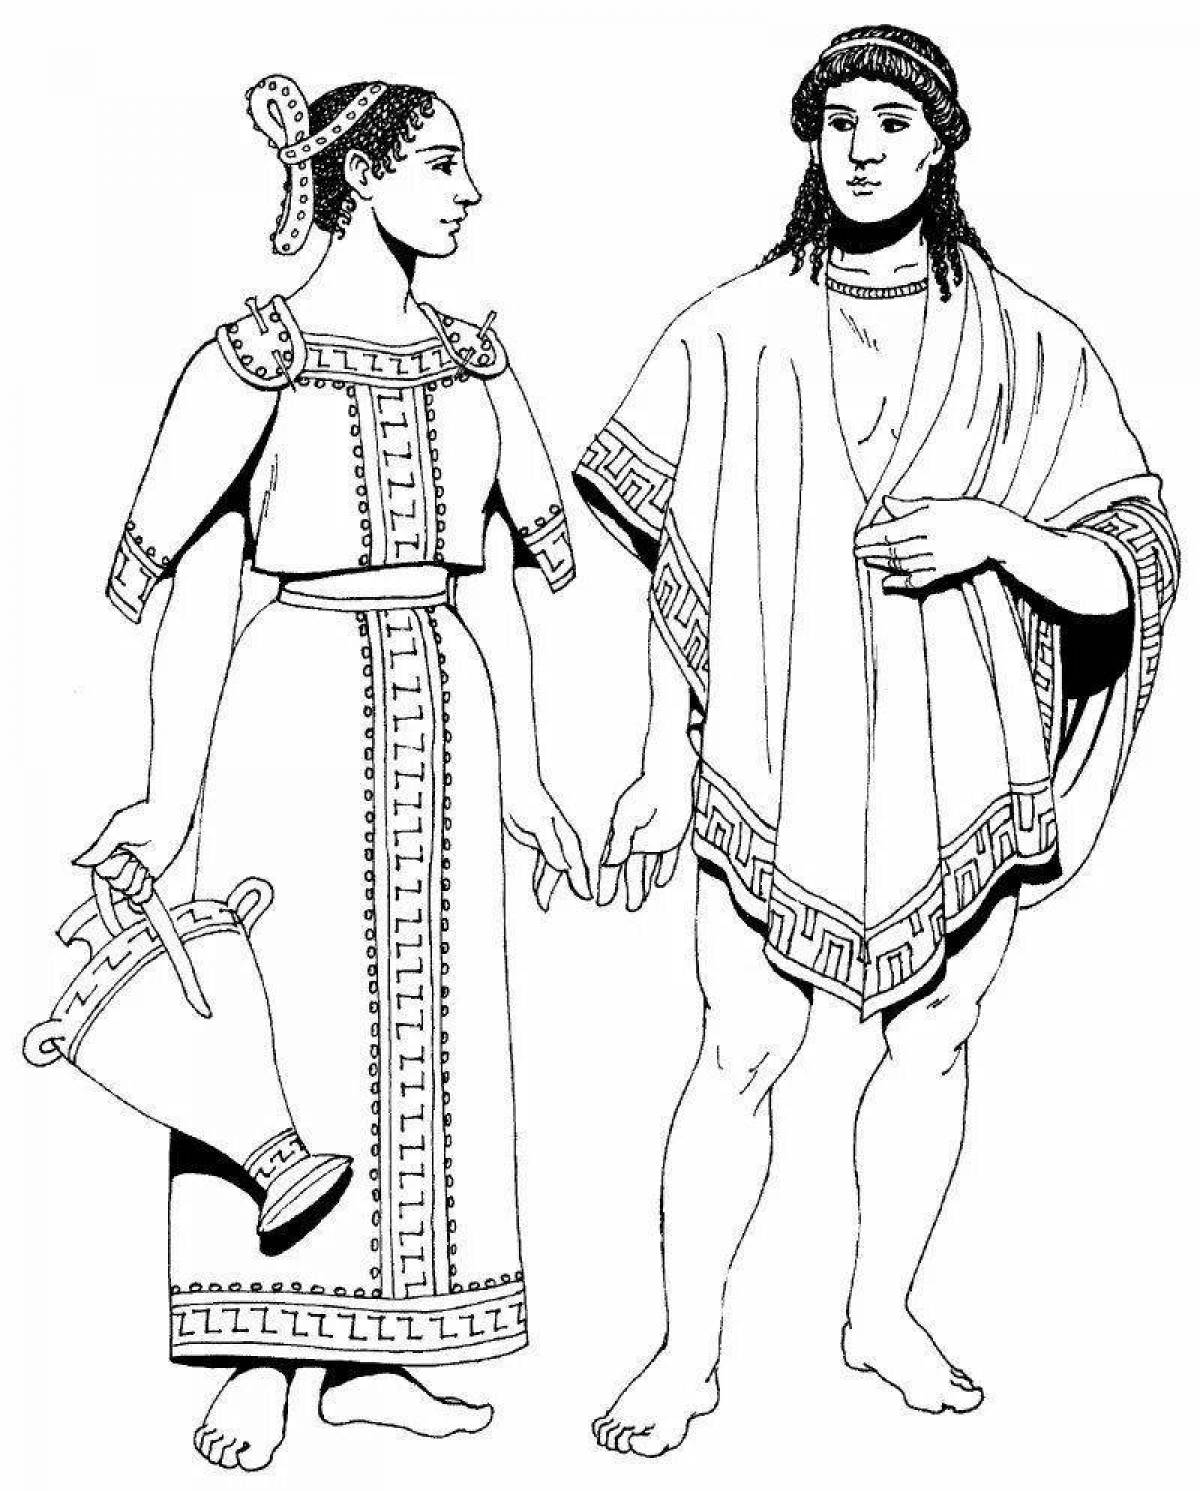 Great coloring of ancient Greek clothing